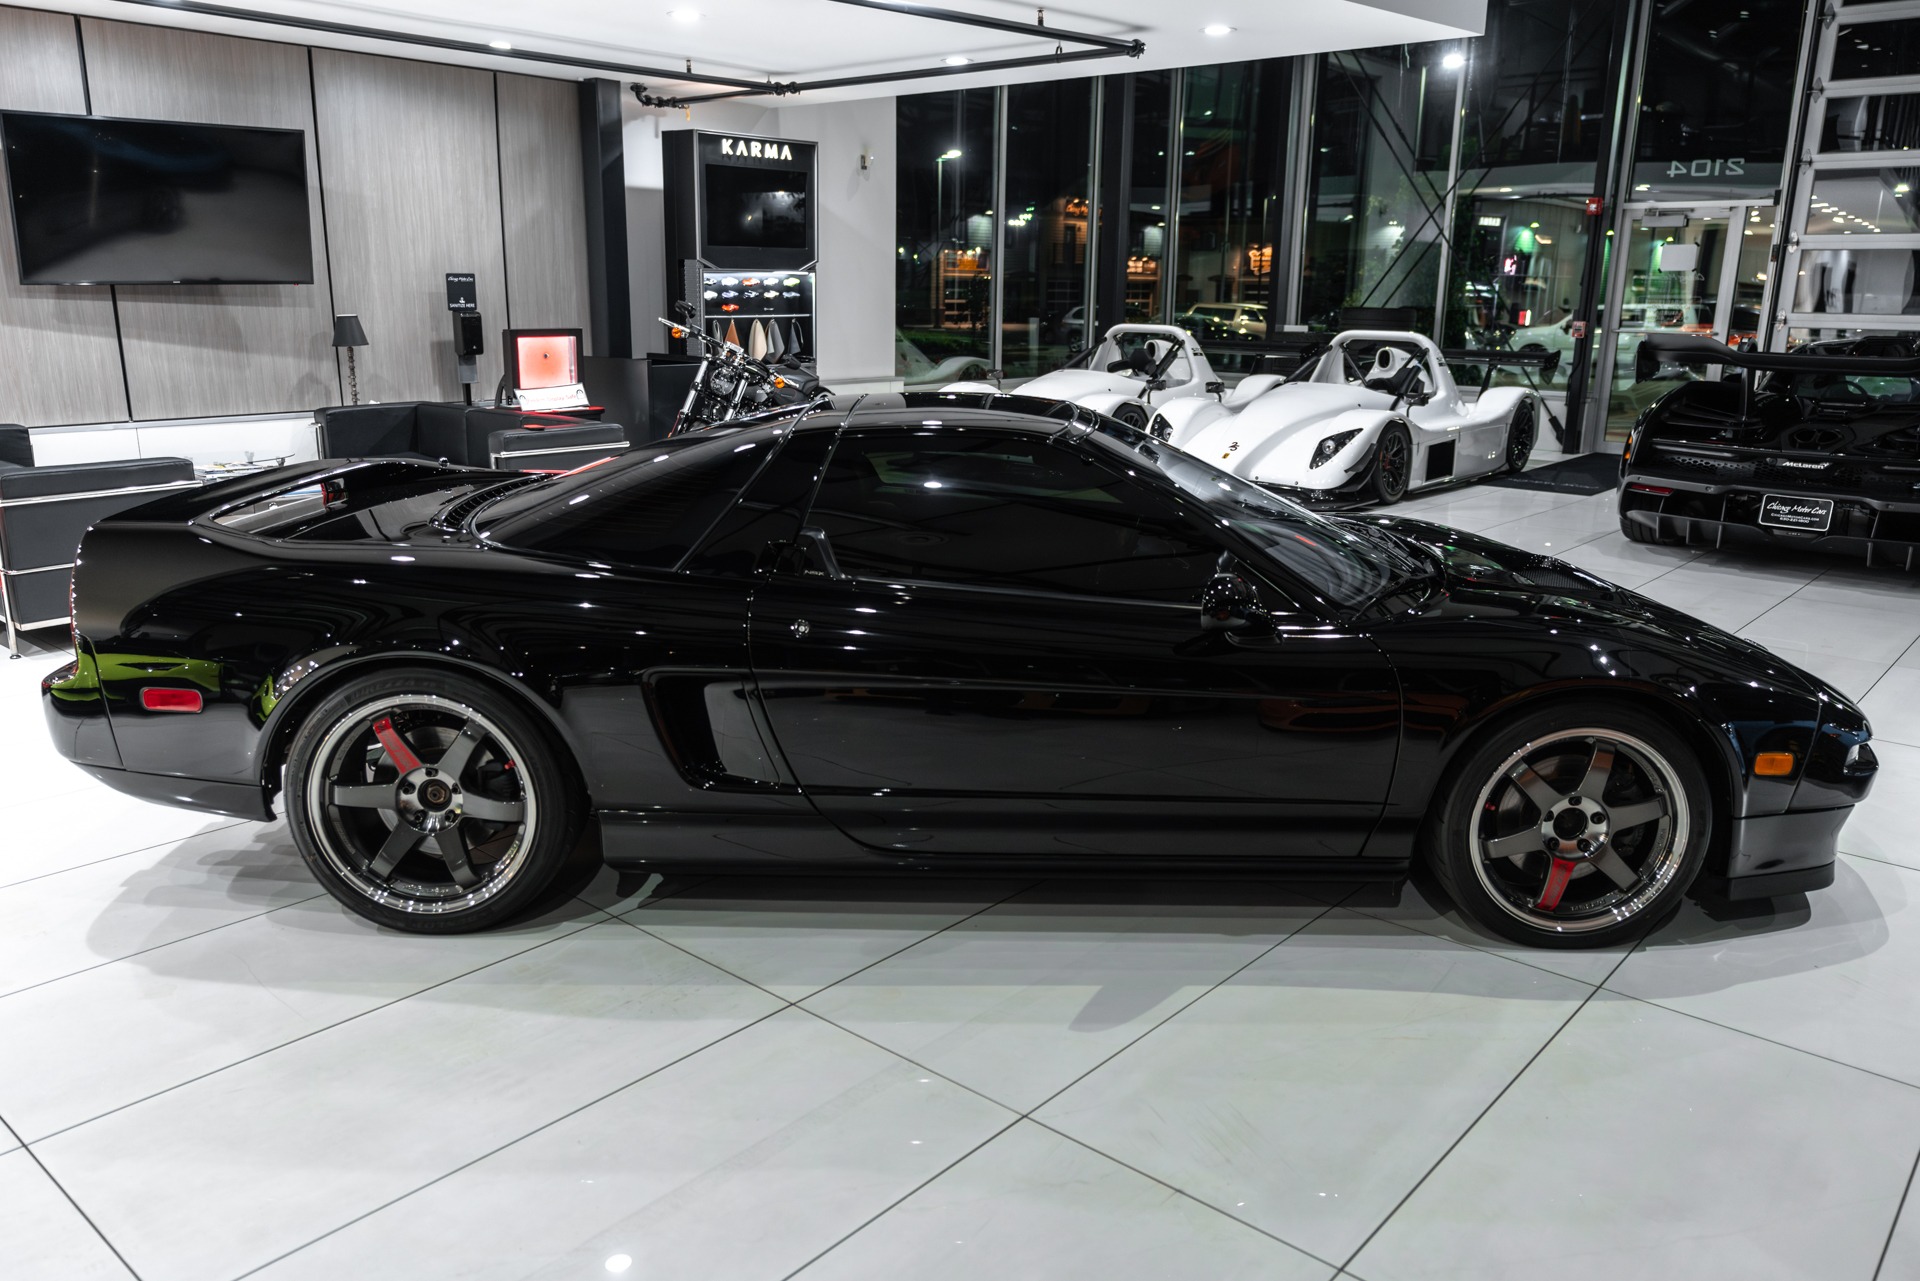 Used-2001-Acura-NSX-T-Coupe-Science-of-Speed-Supercharged-6-Speed-Manual-Fully-Serviced